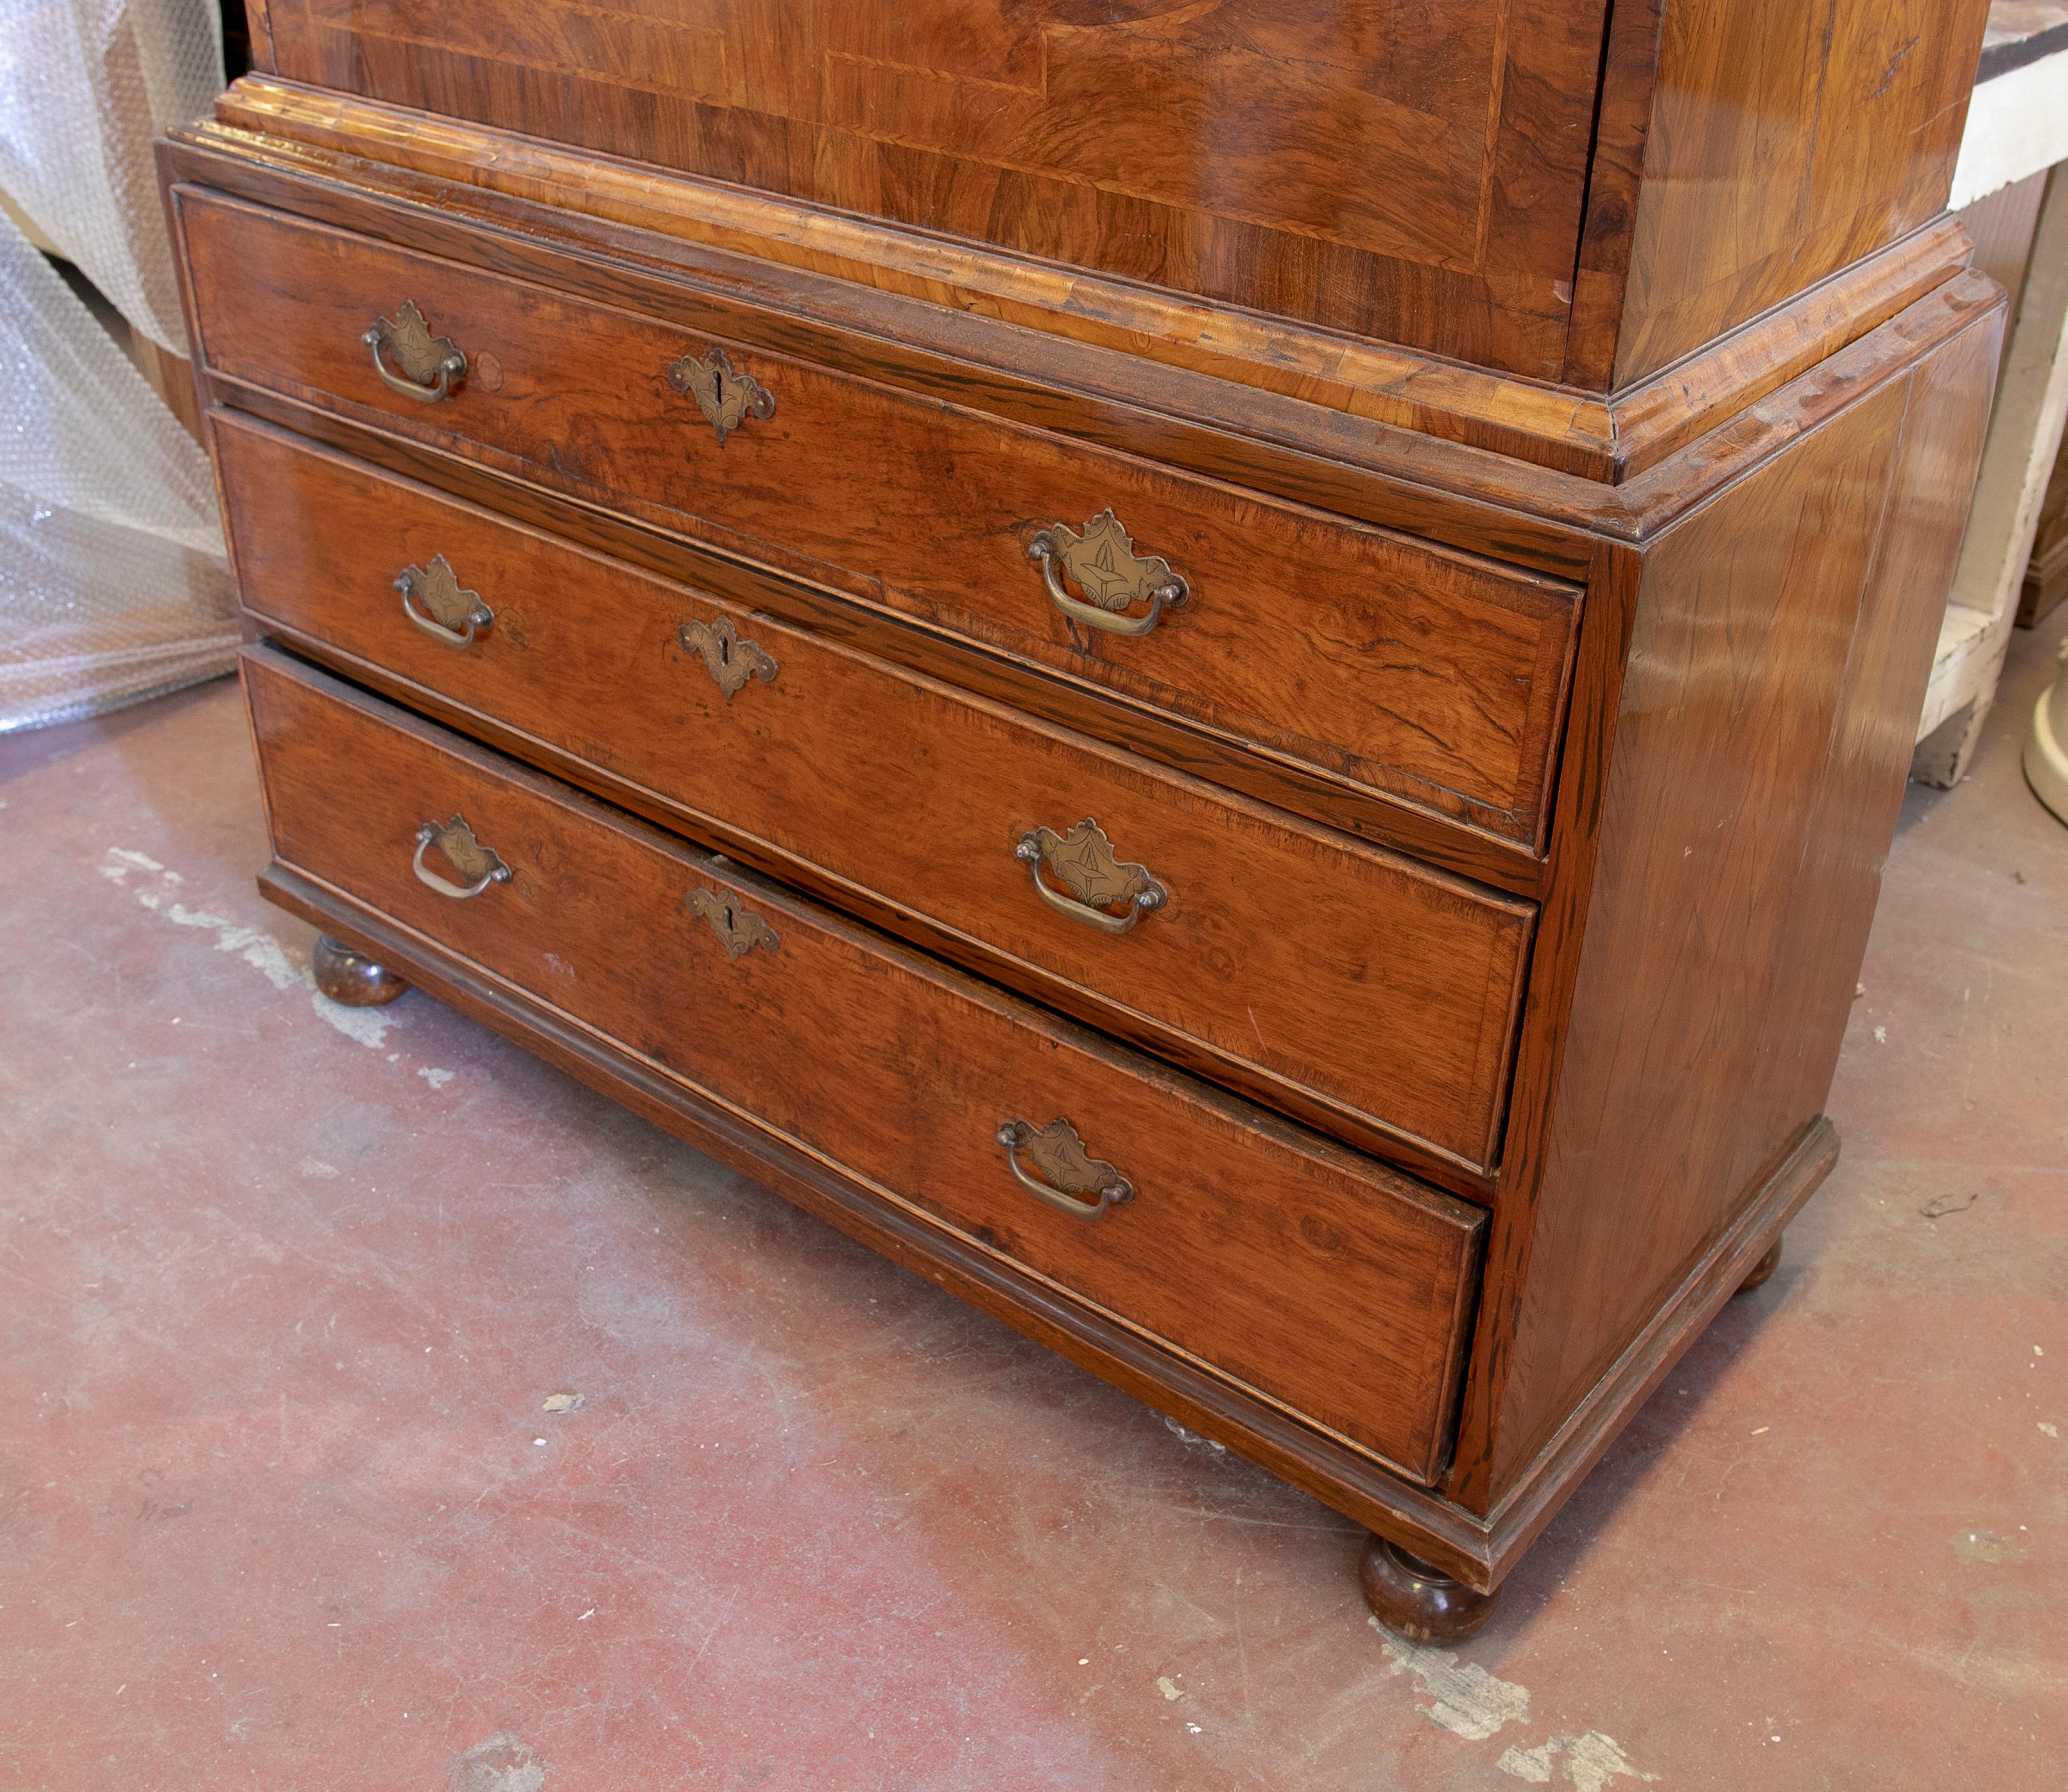 19th century English oak root writing desk with bronze fittings.